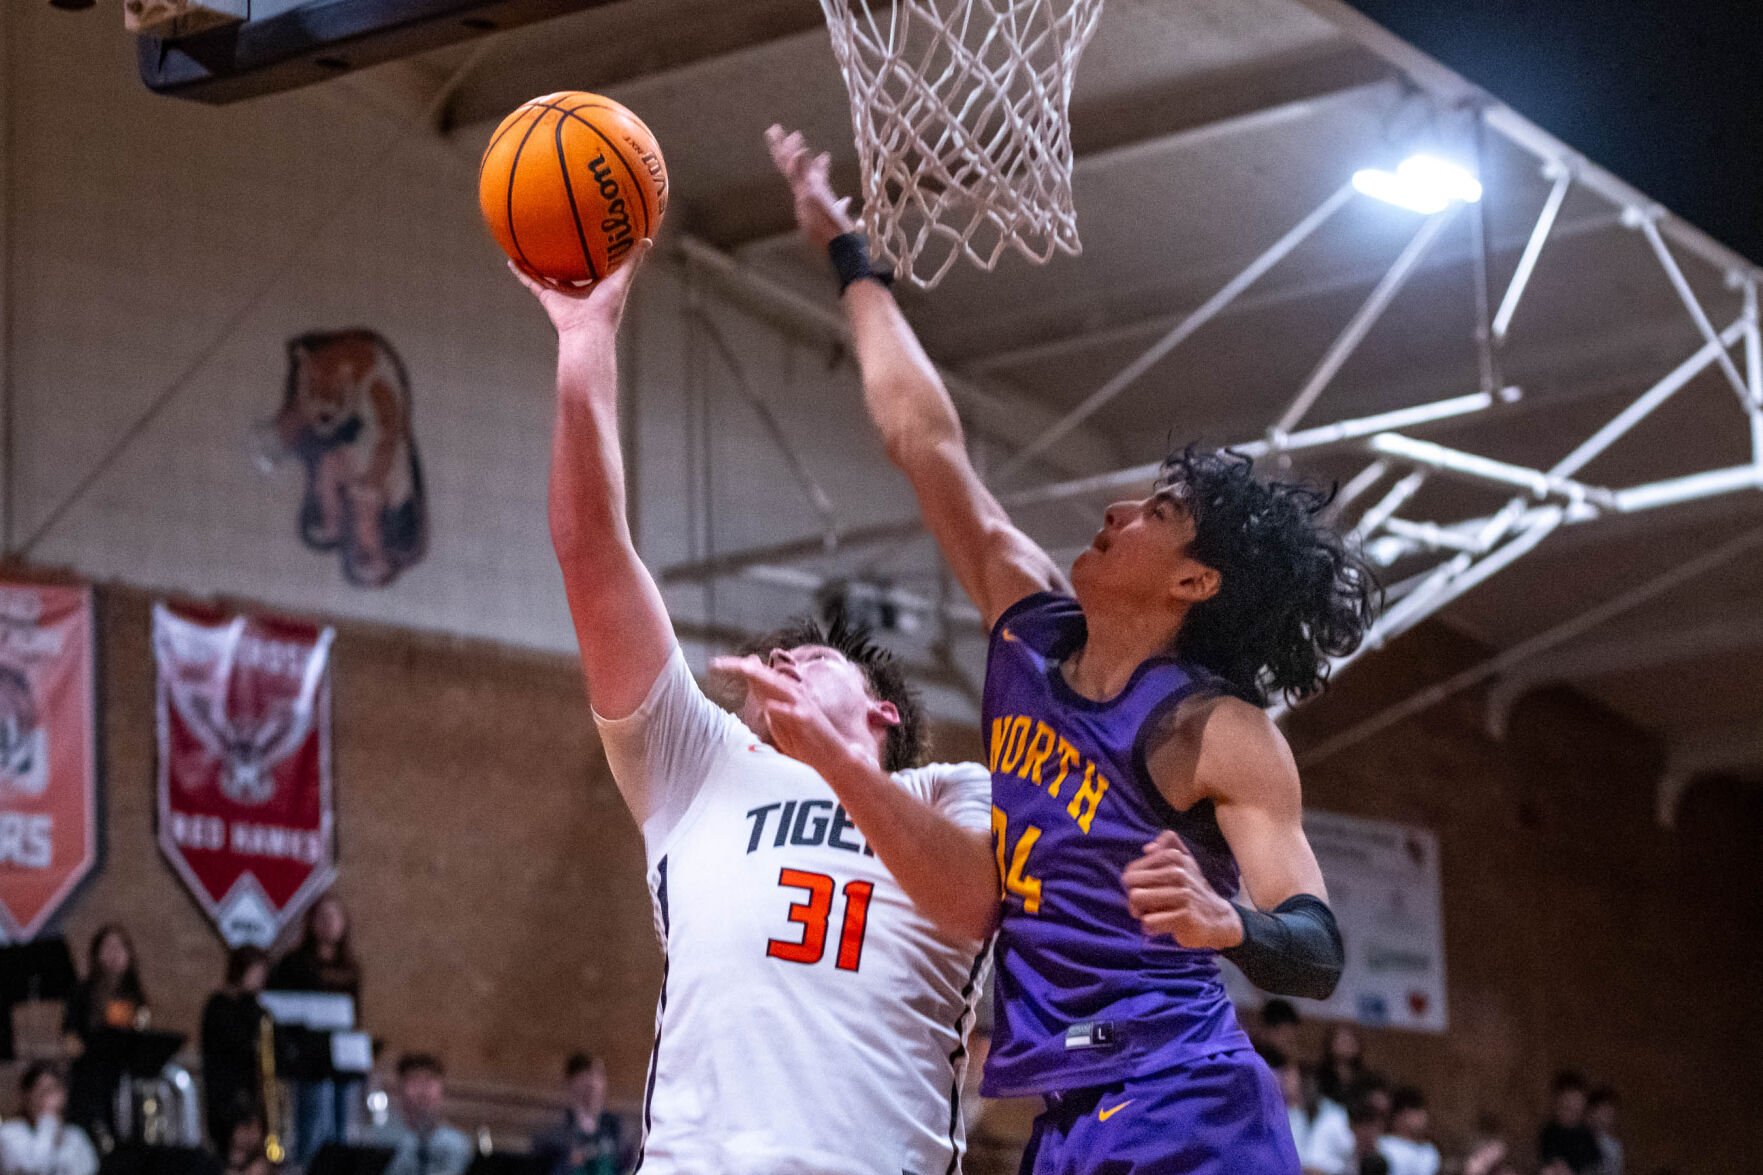 Grand Junction High School Boys Basketball Team Secures Convincing 76-43 Victory Over Denver North in Class 5A Playoffs